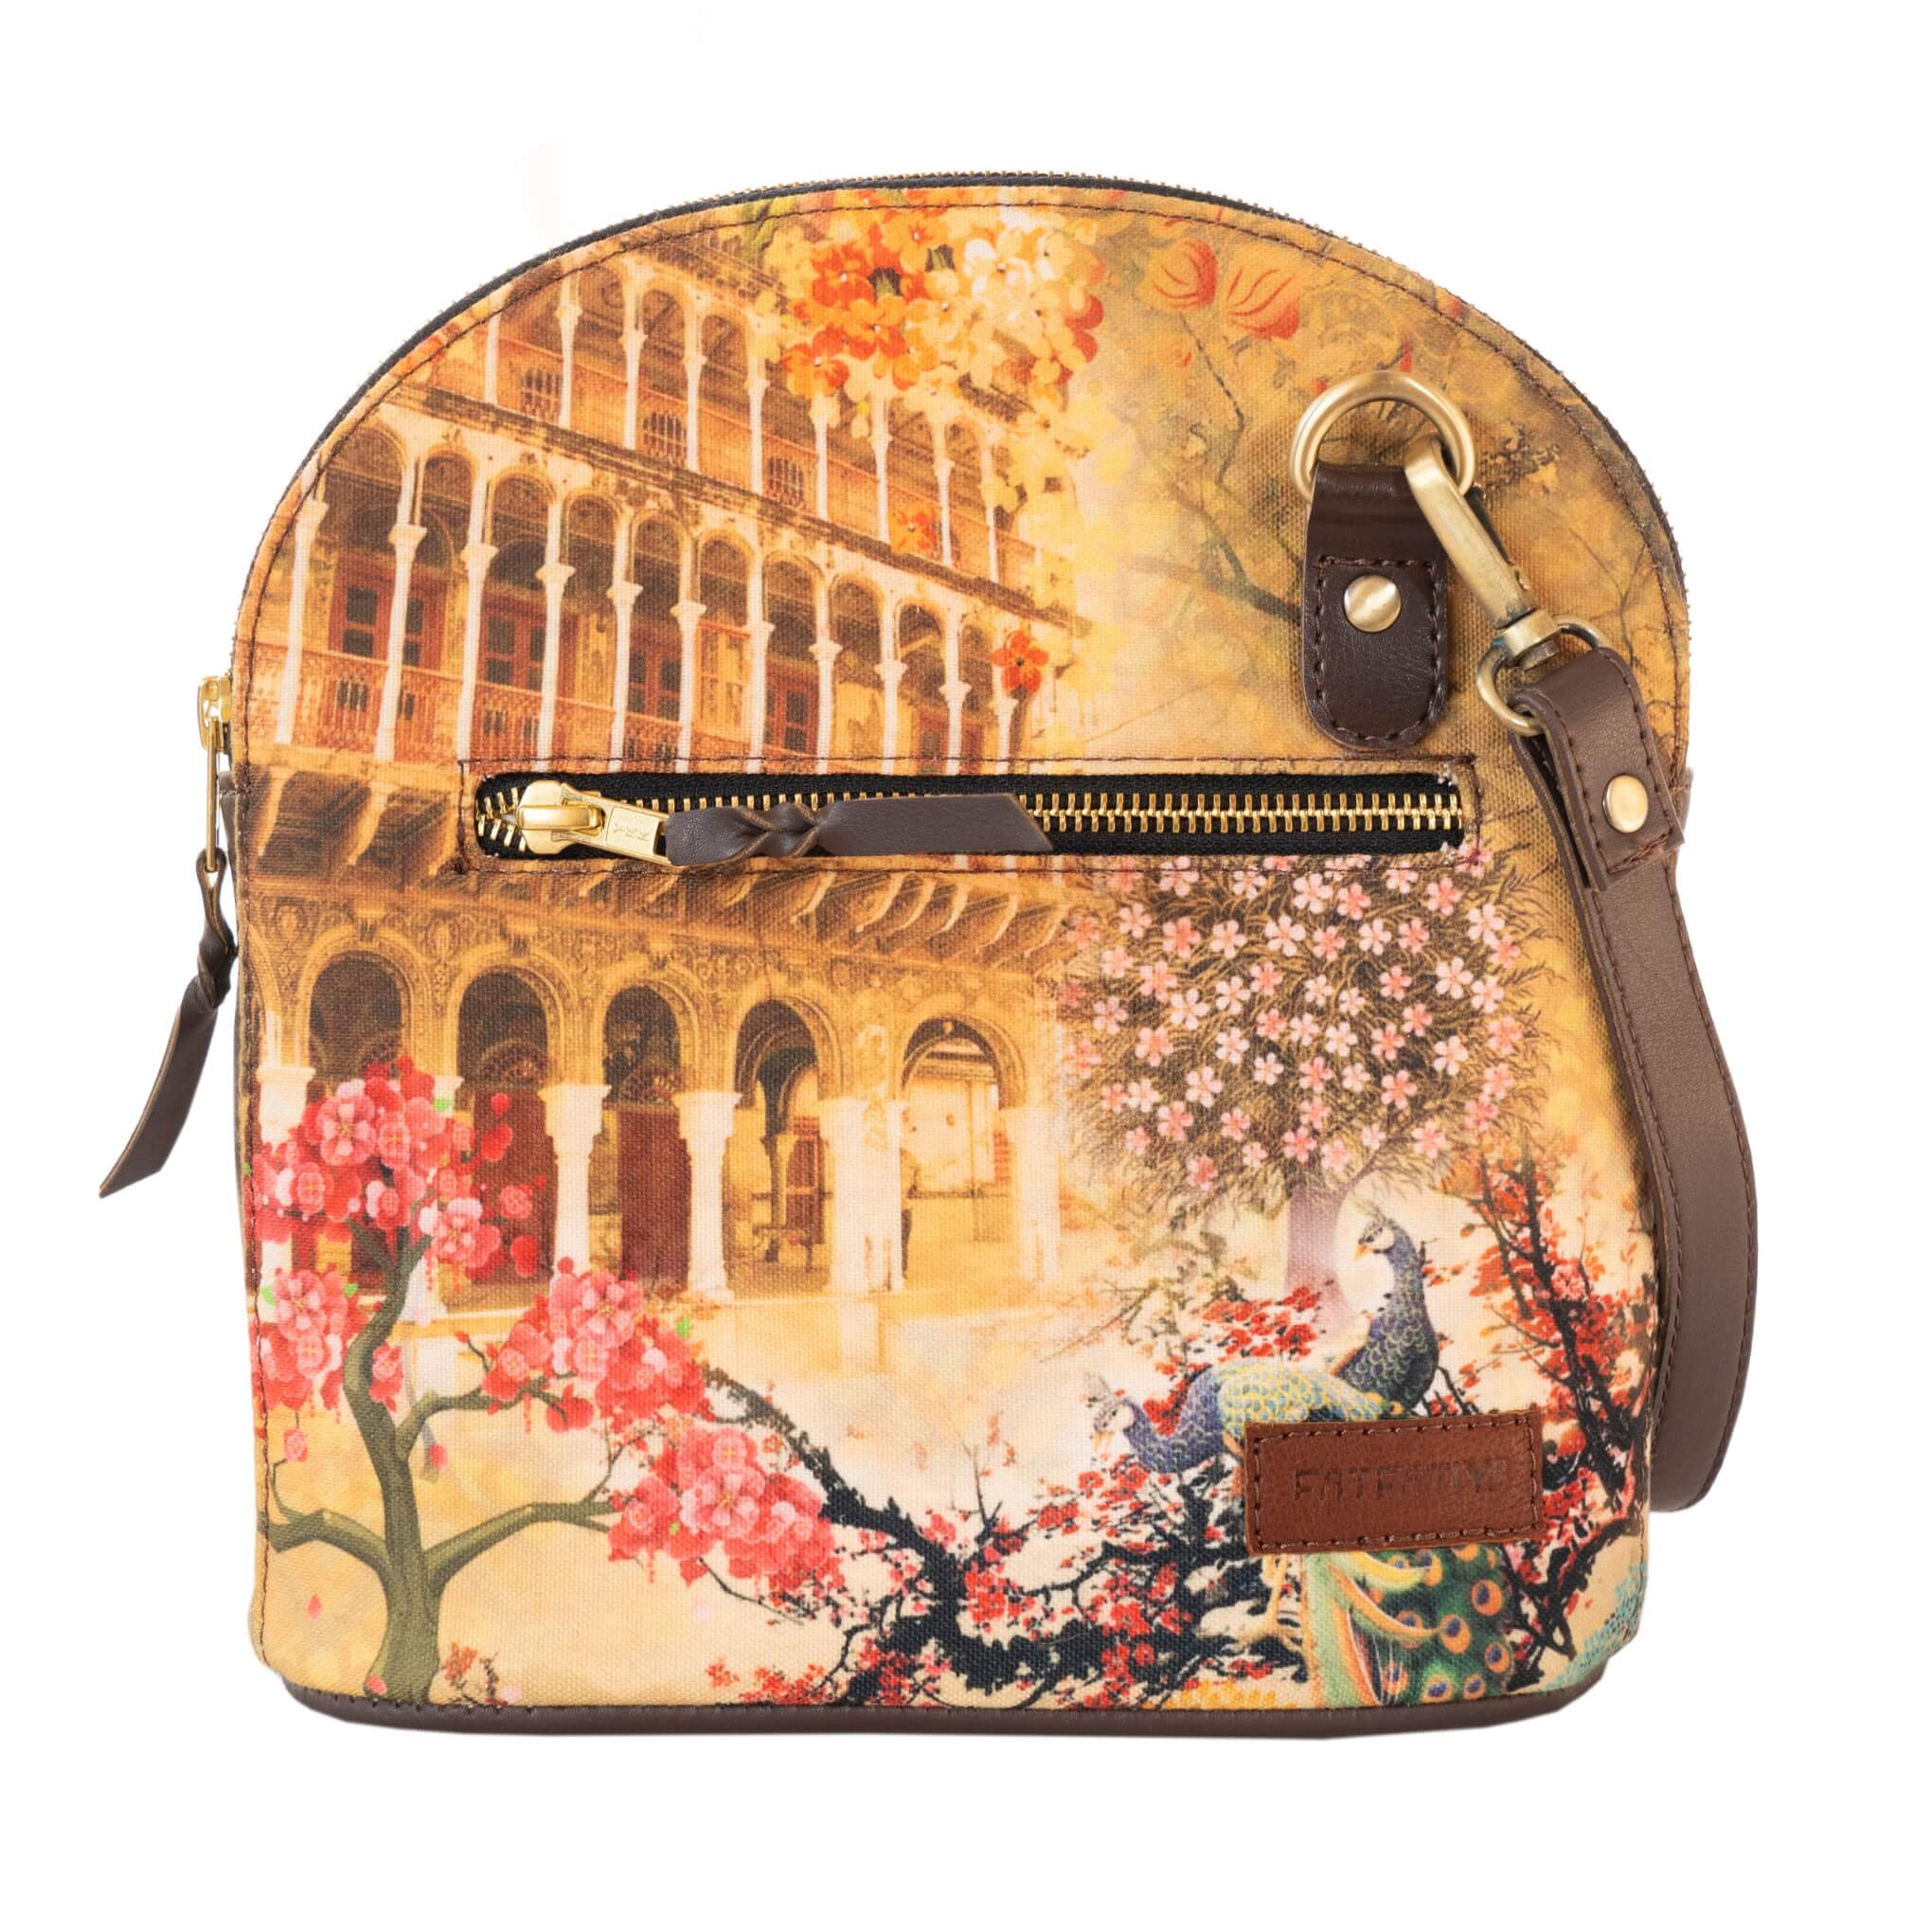 Fort and Floral Fashion Cross-body Bag